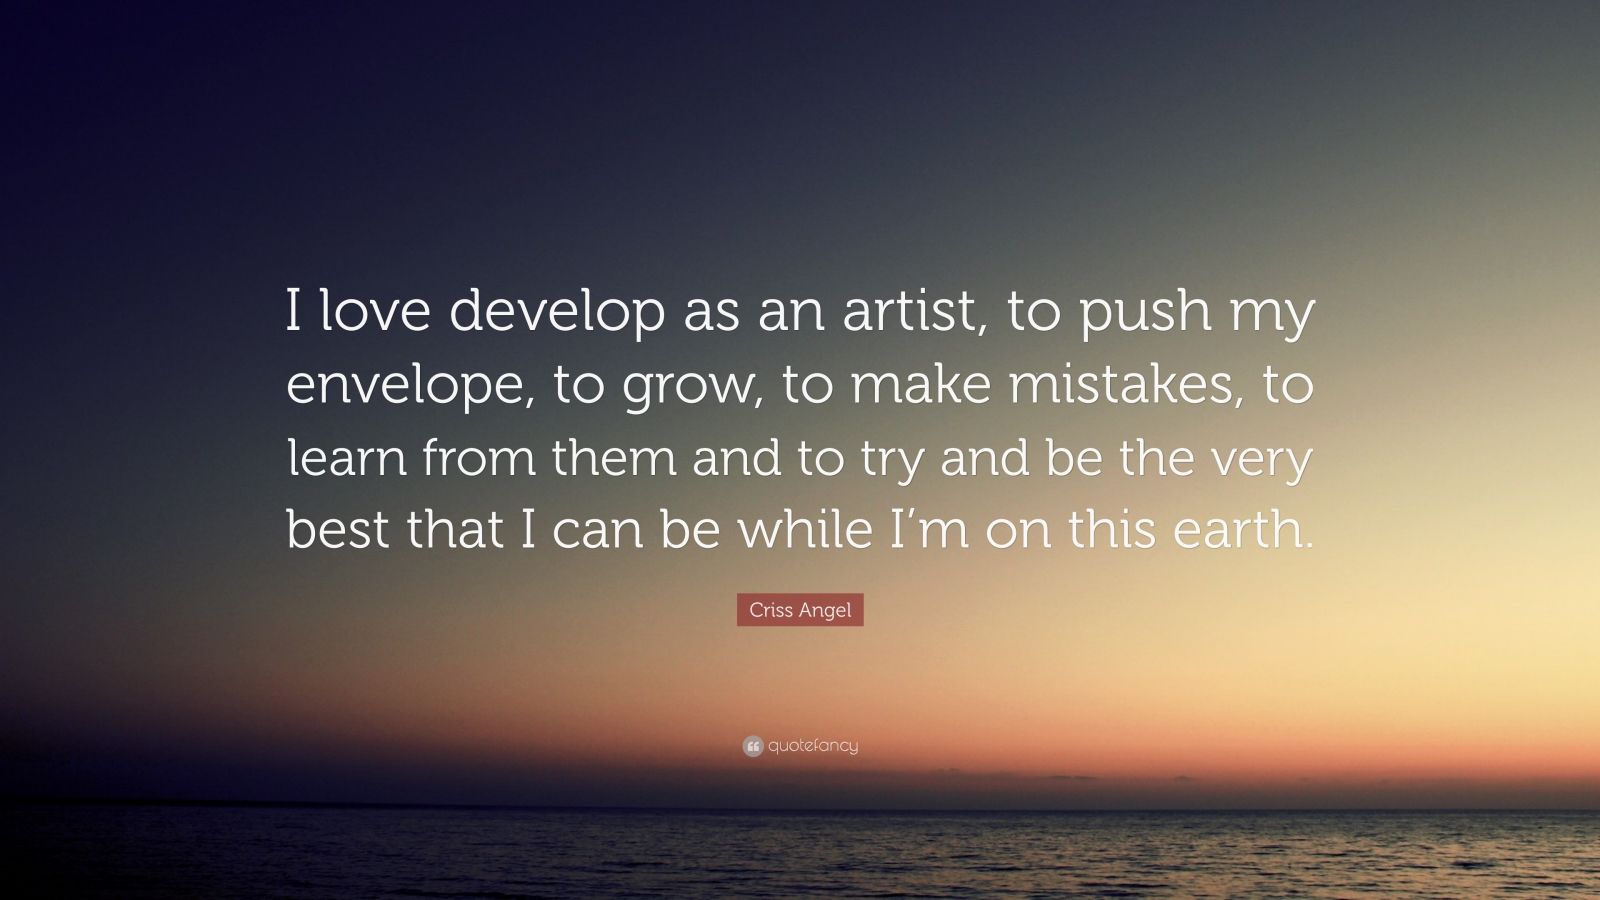 Criss Angel Quote: "I love develop as an artist, to push my envelope, to grow, to make mistakes ...